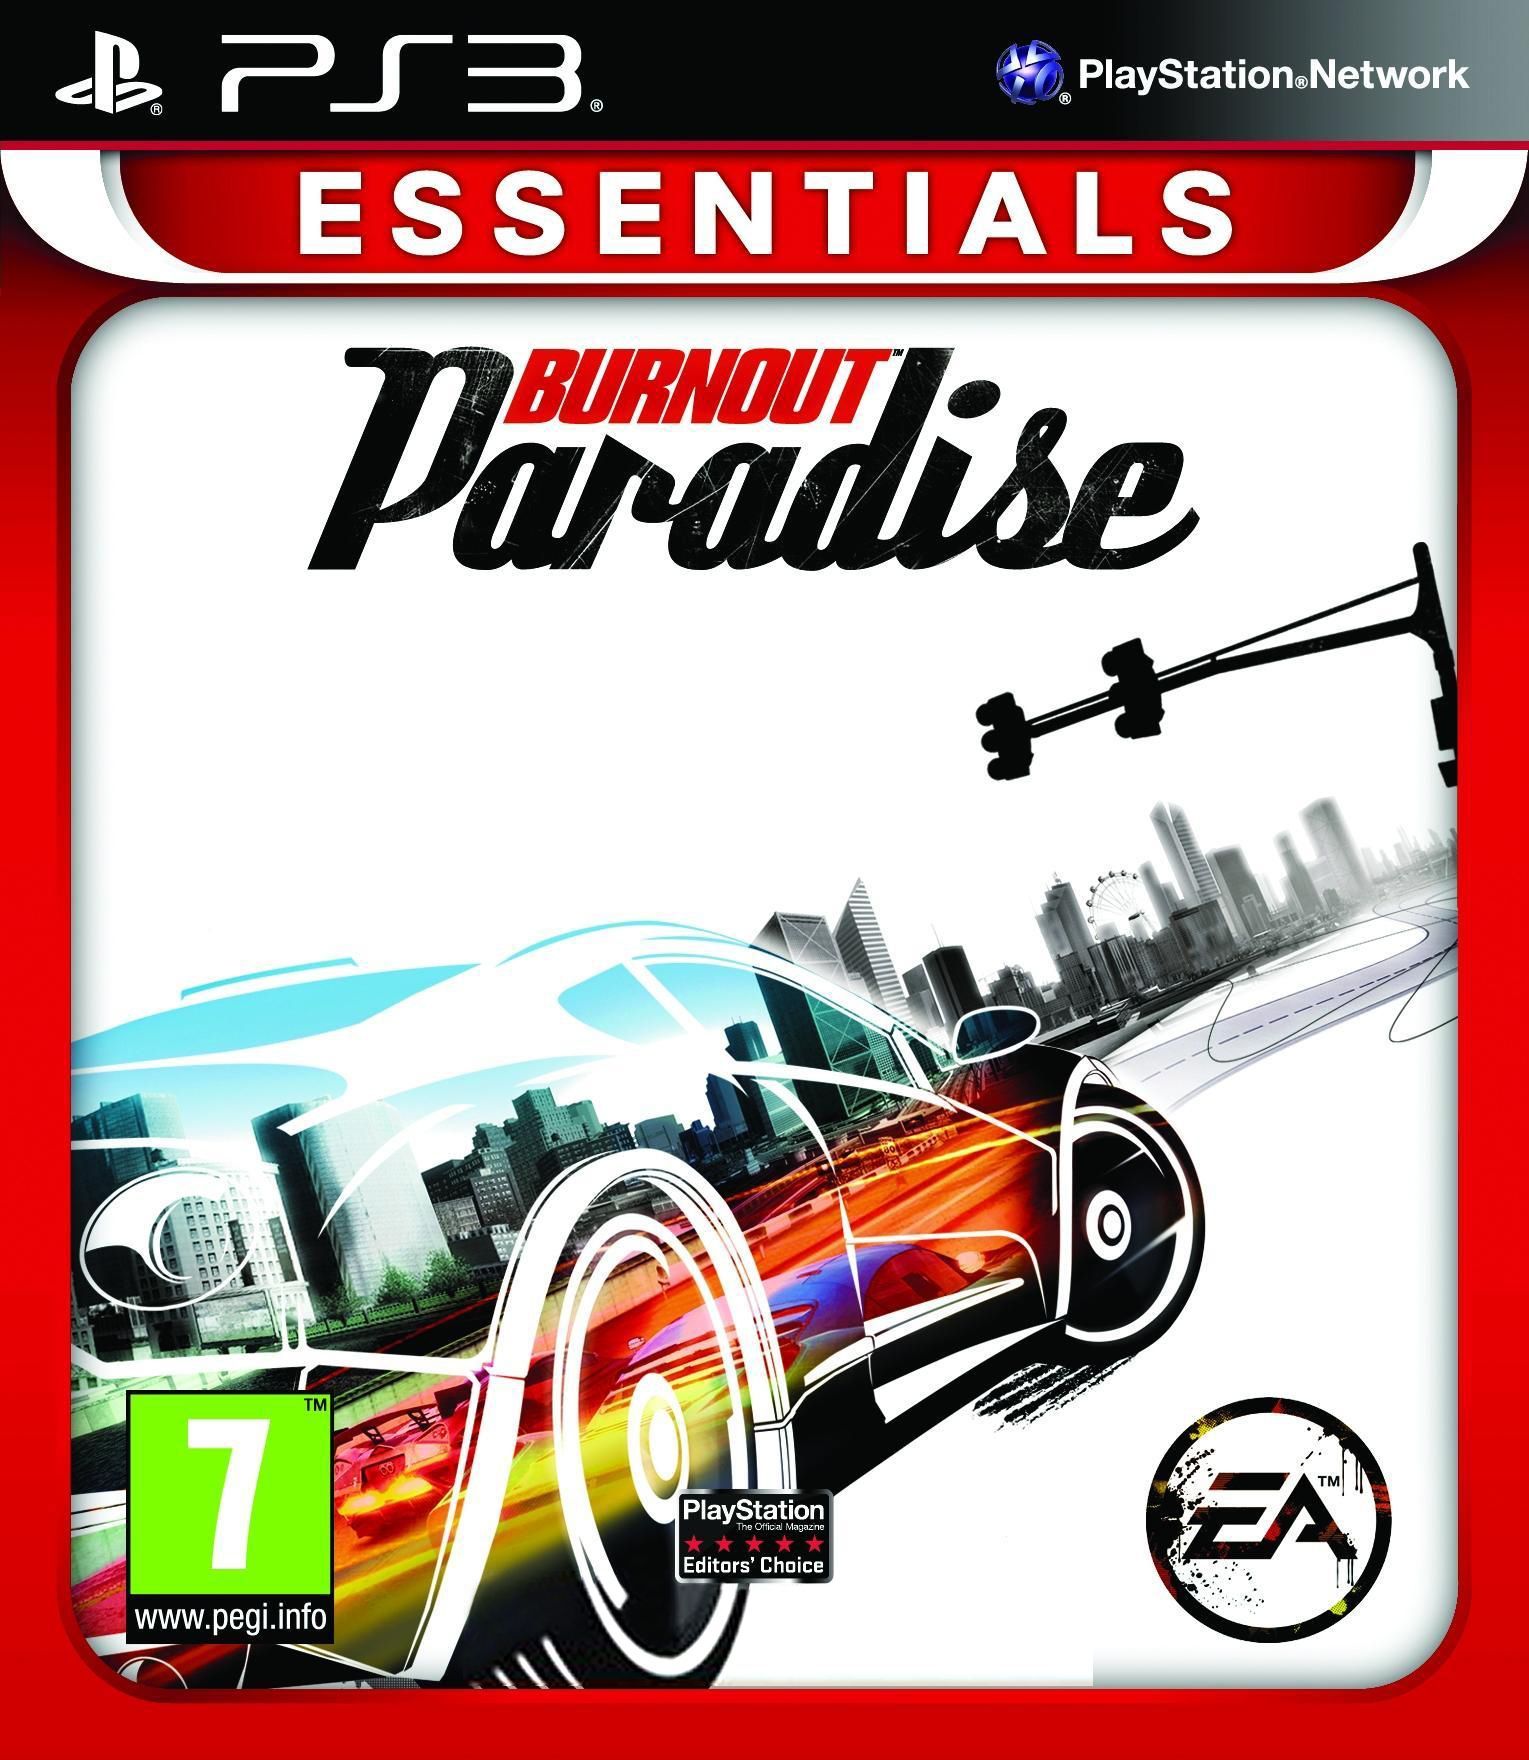 What Does Essential Mean On Ps3 Games